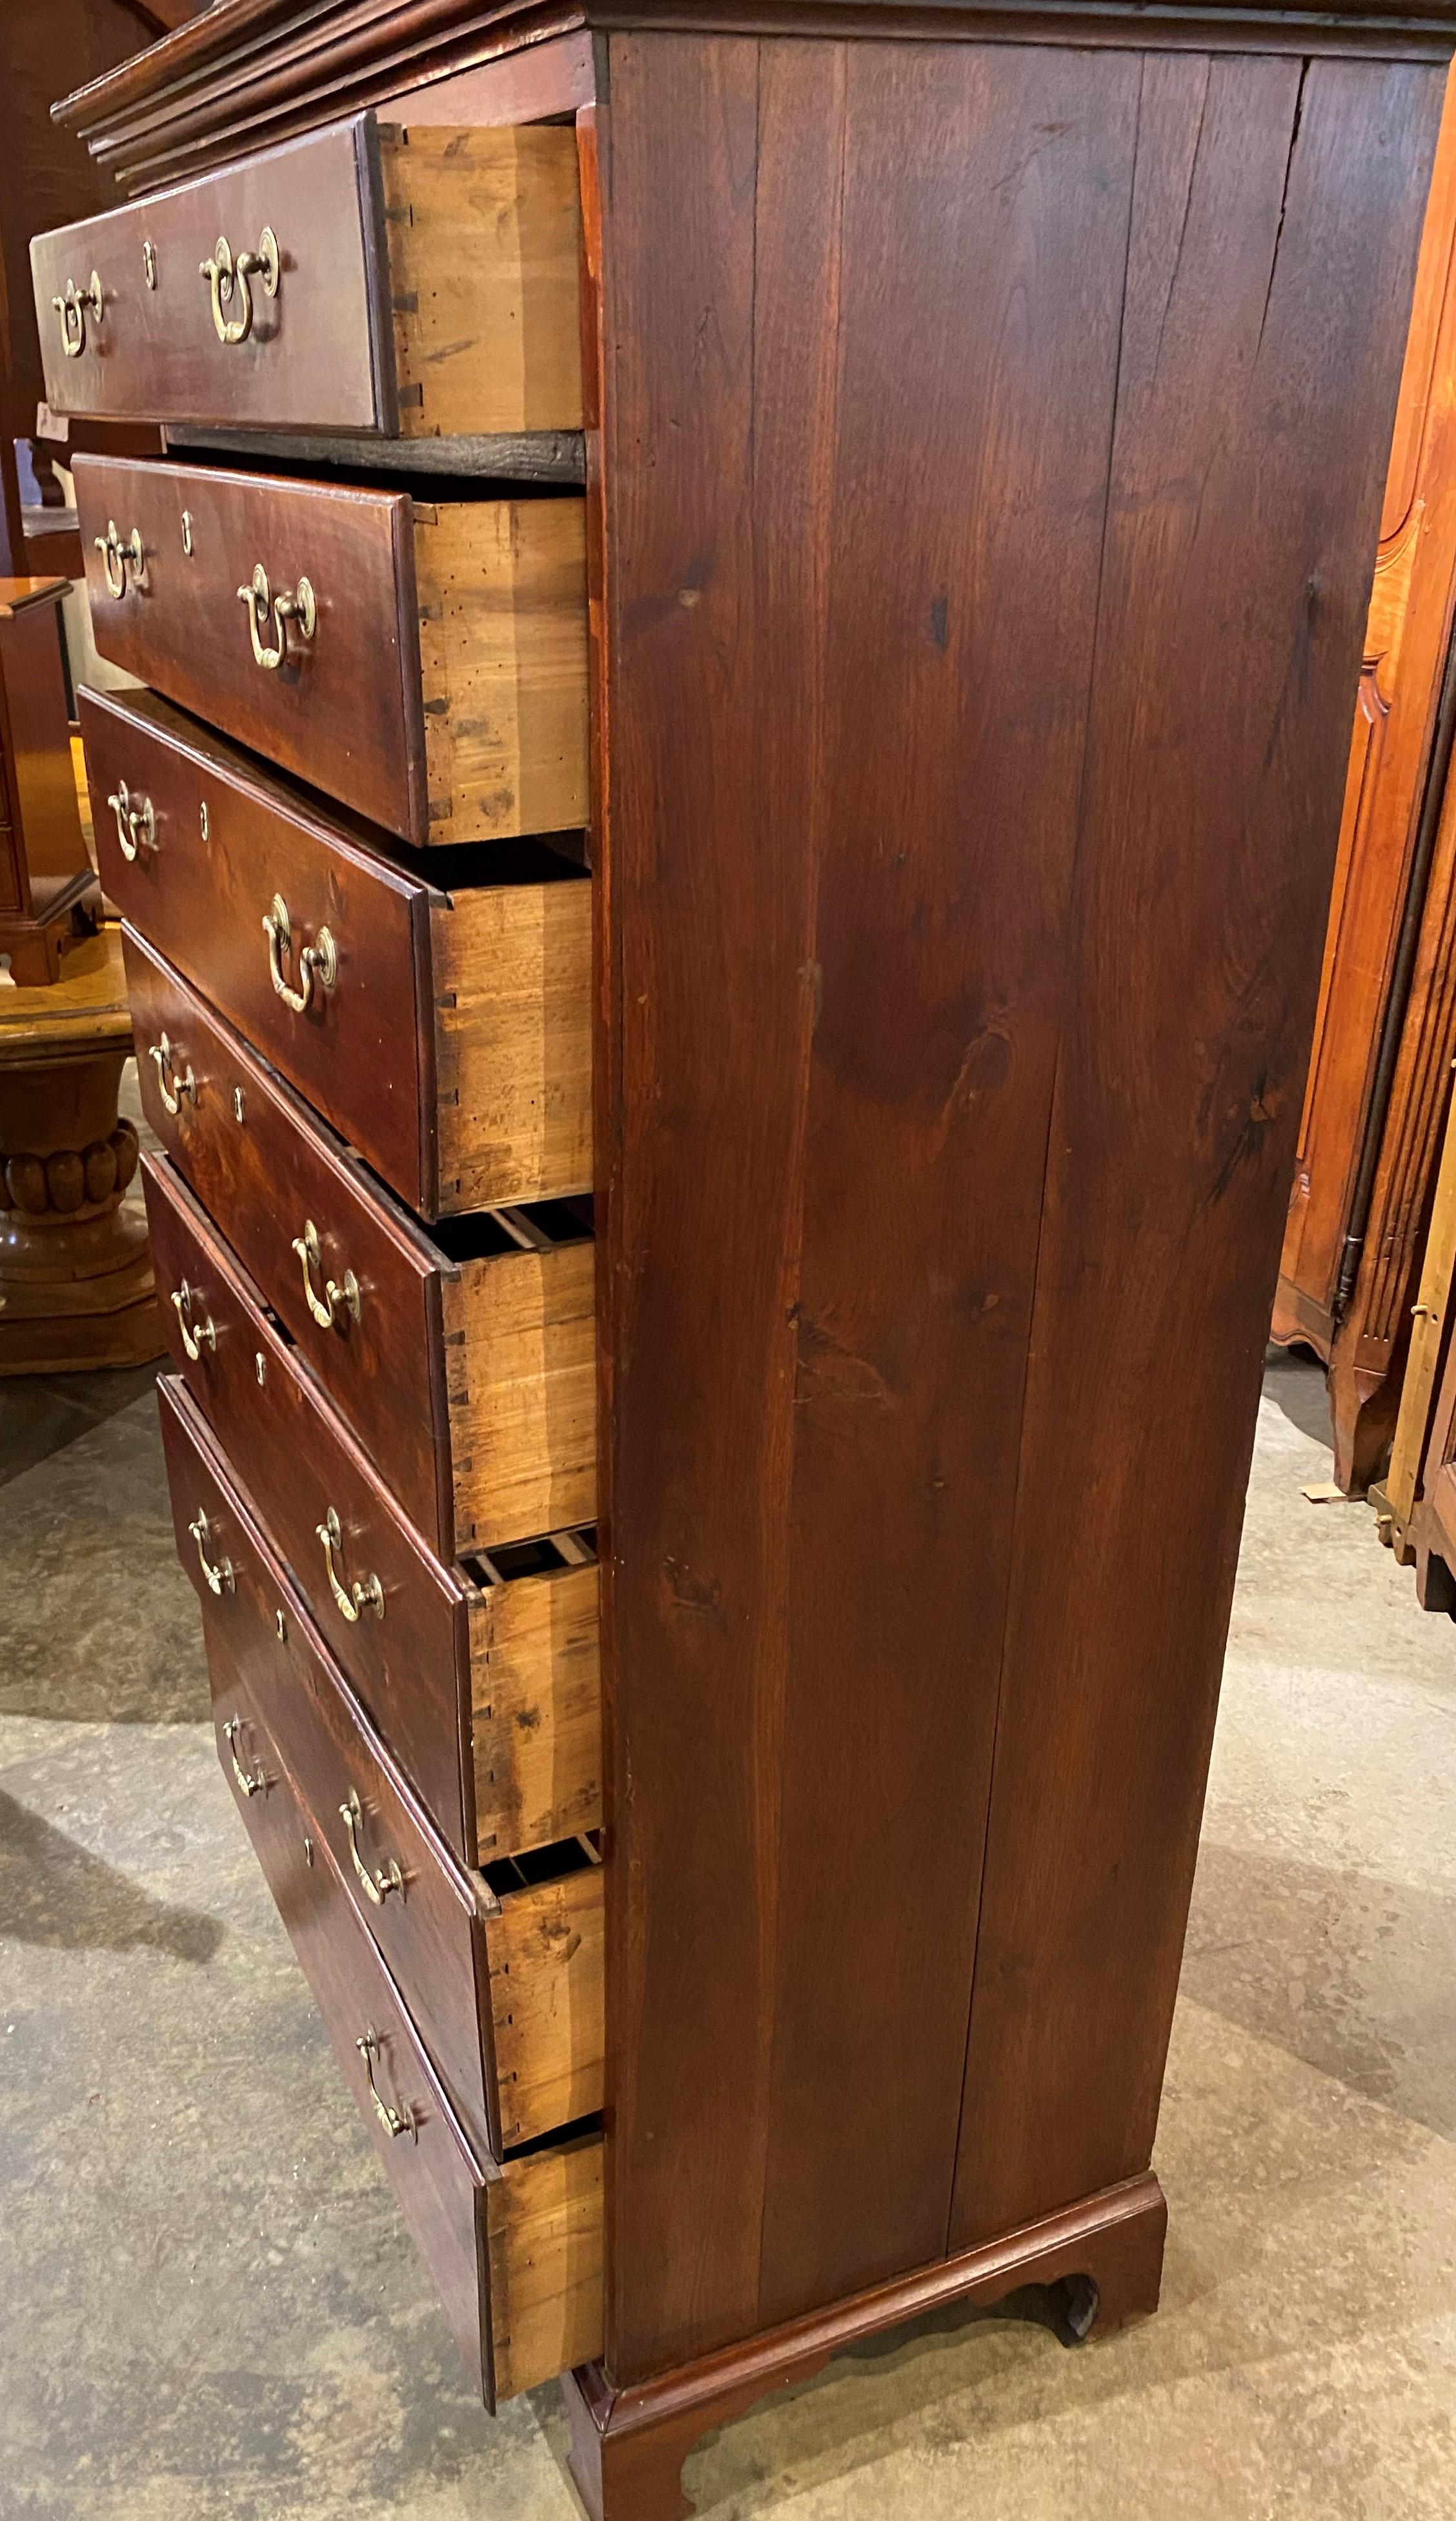 Hand-Carved Late 18th C Walnut Seven Drawer Tall Chest, Probably Maryland or Pennsylvania